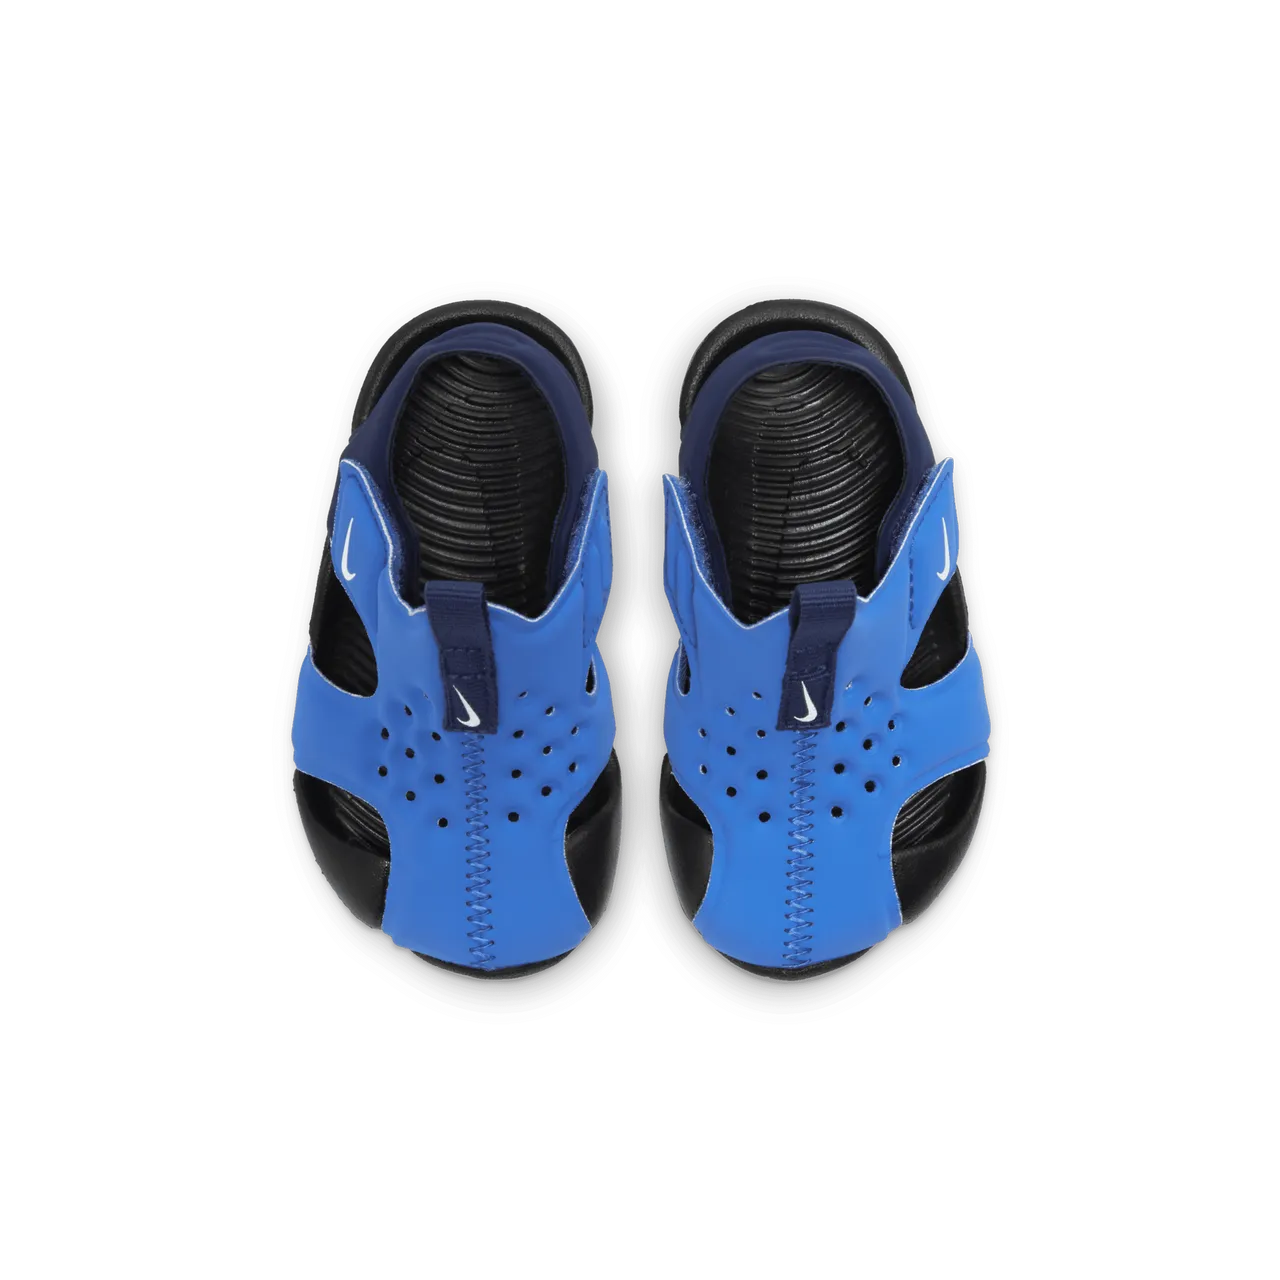 Nike Sunray Protect 2 Baby/Toddler Sandals - Blue